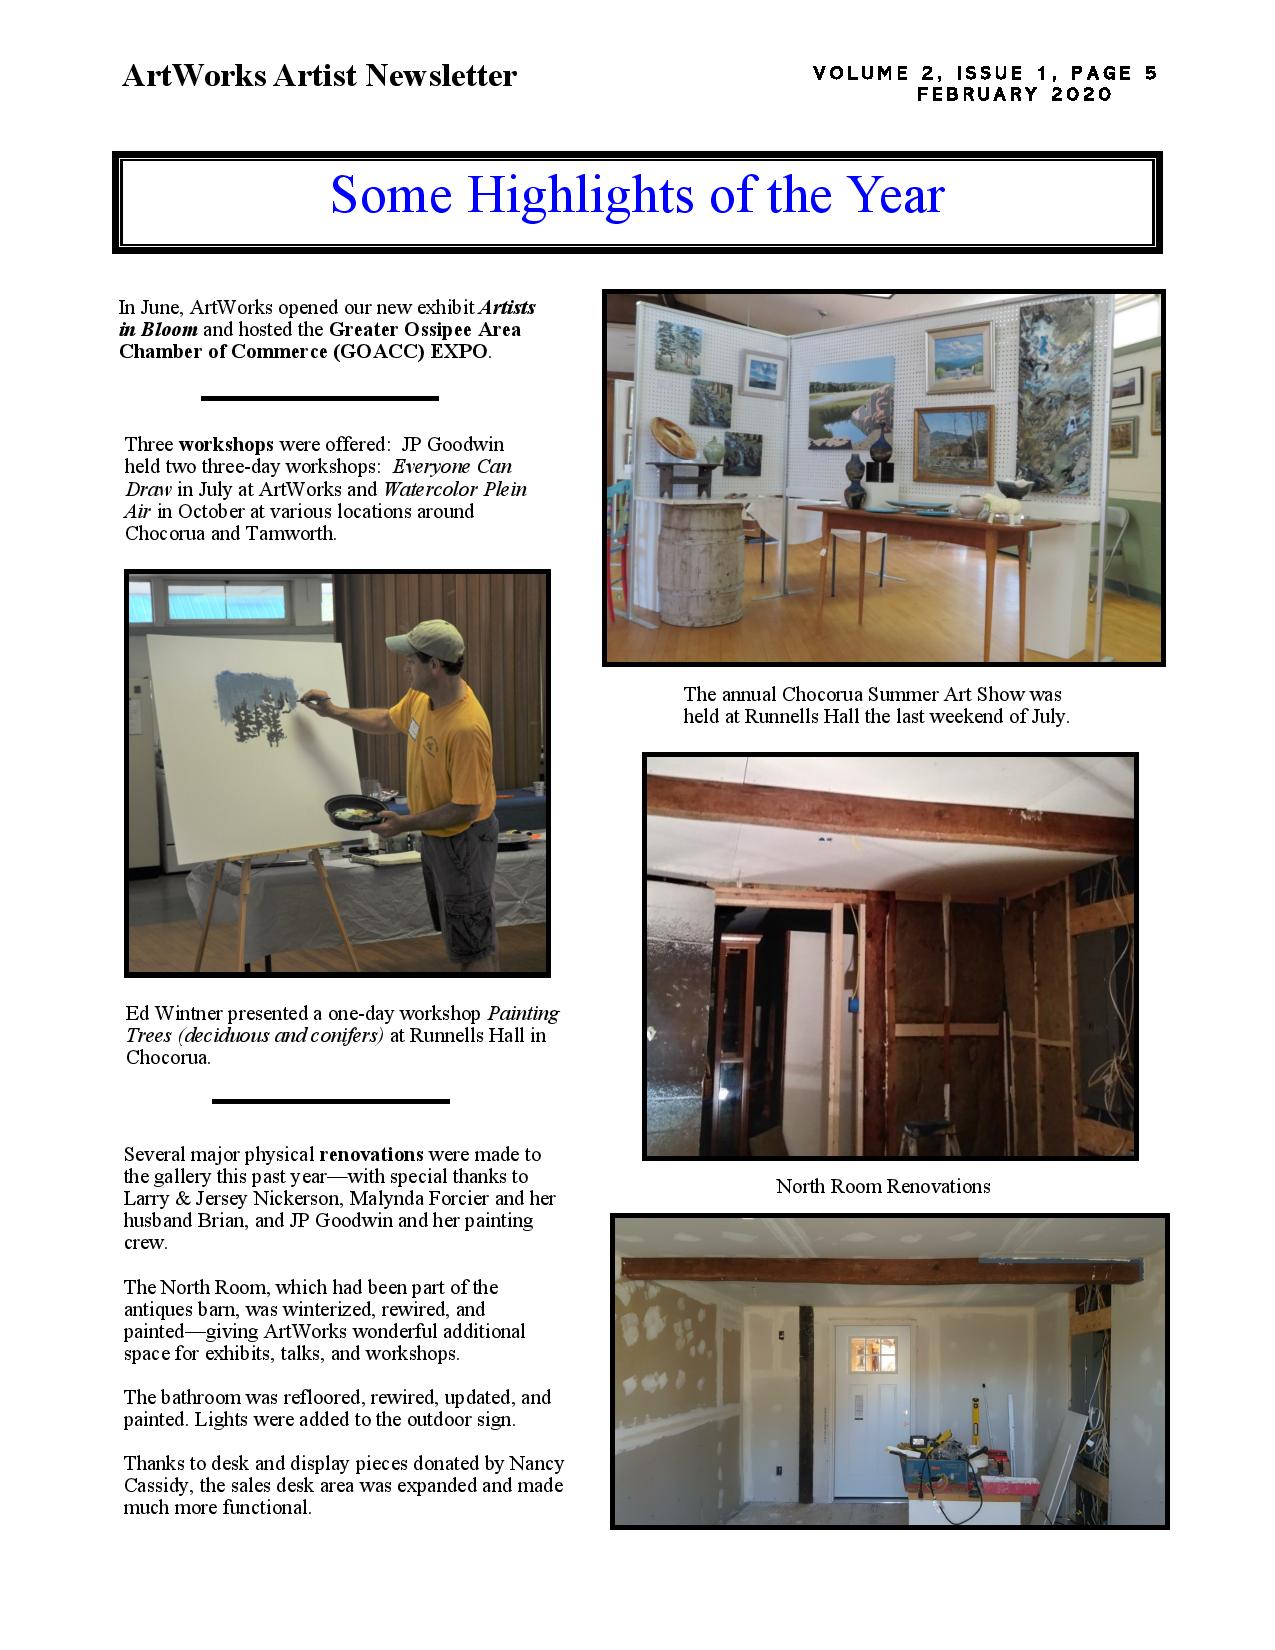 AW newsletter Vol 2 Issue 1 gt final PDF-page-005